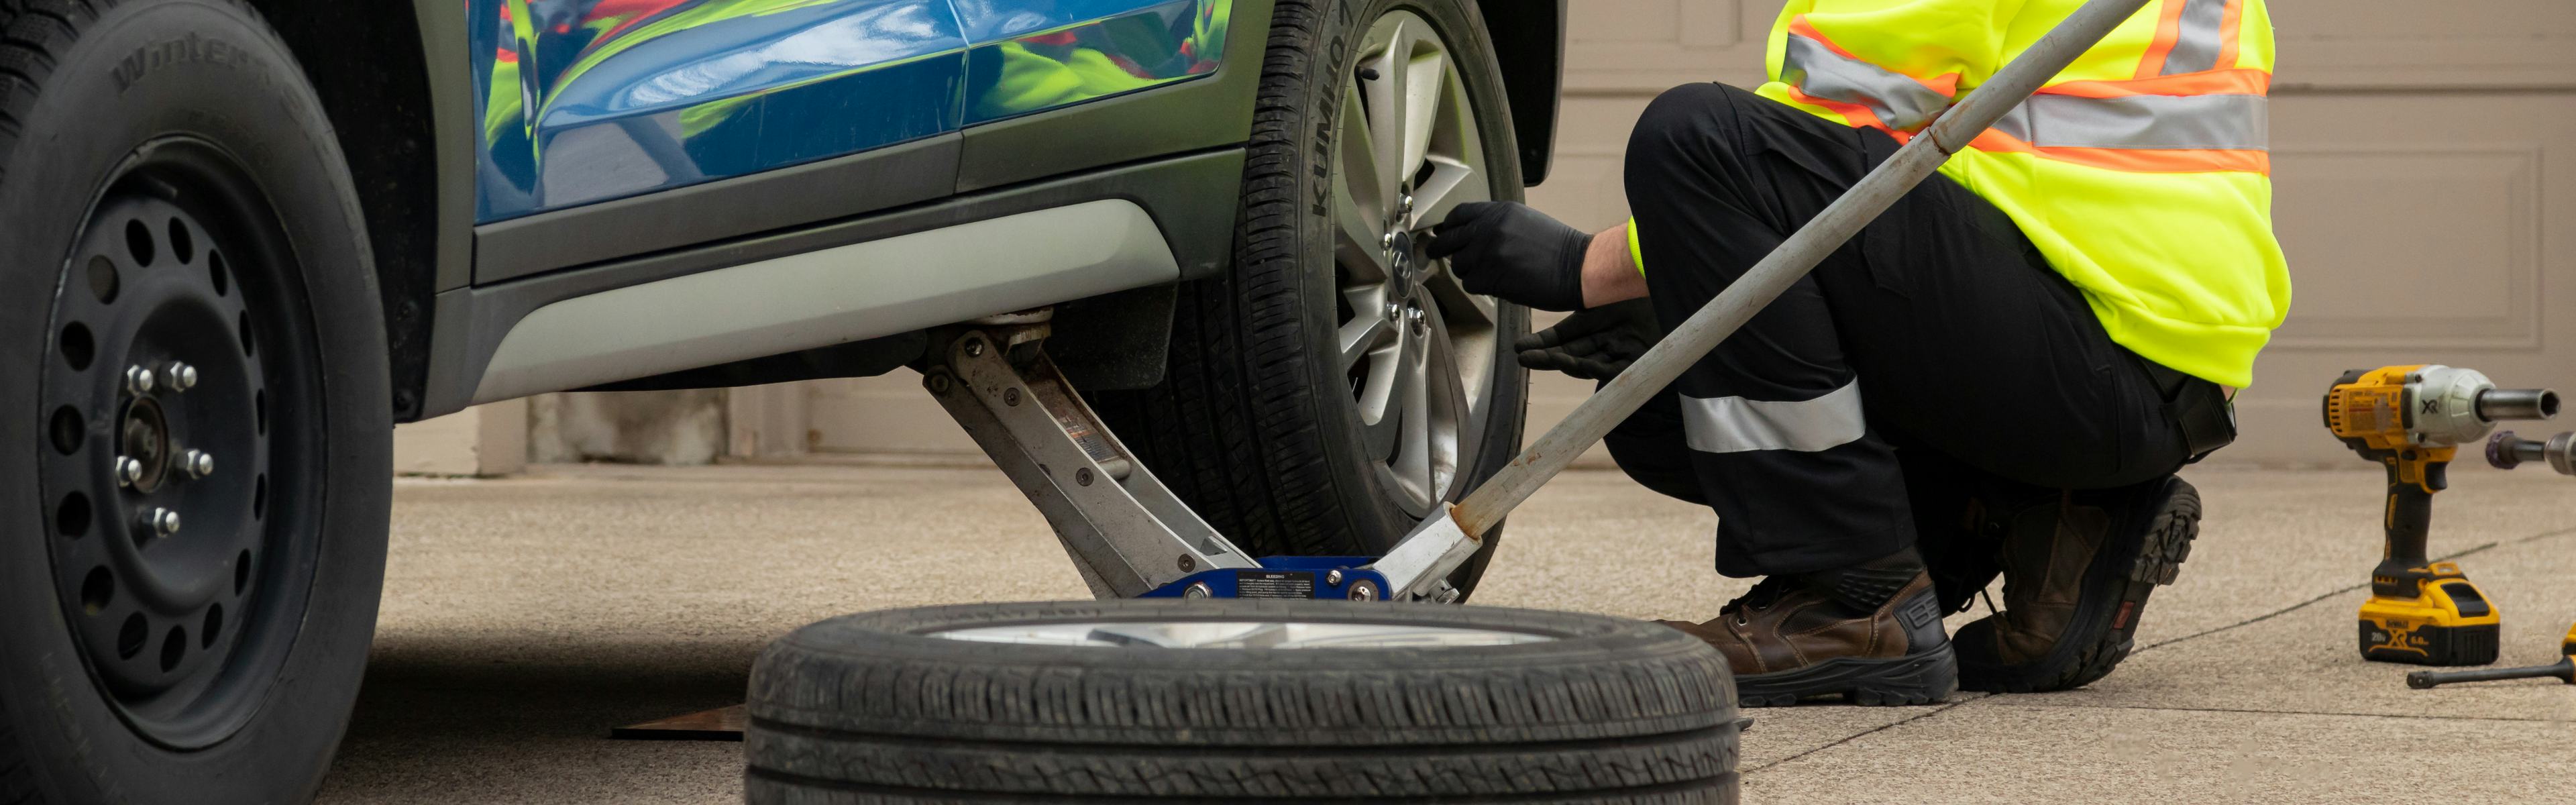 CAA technician changing tires